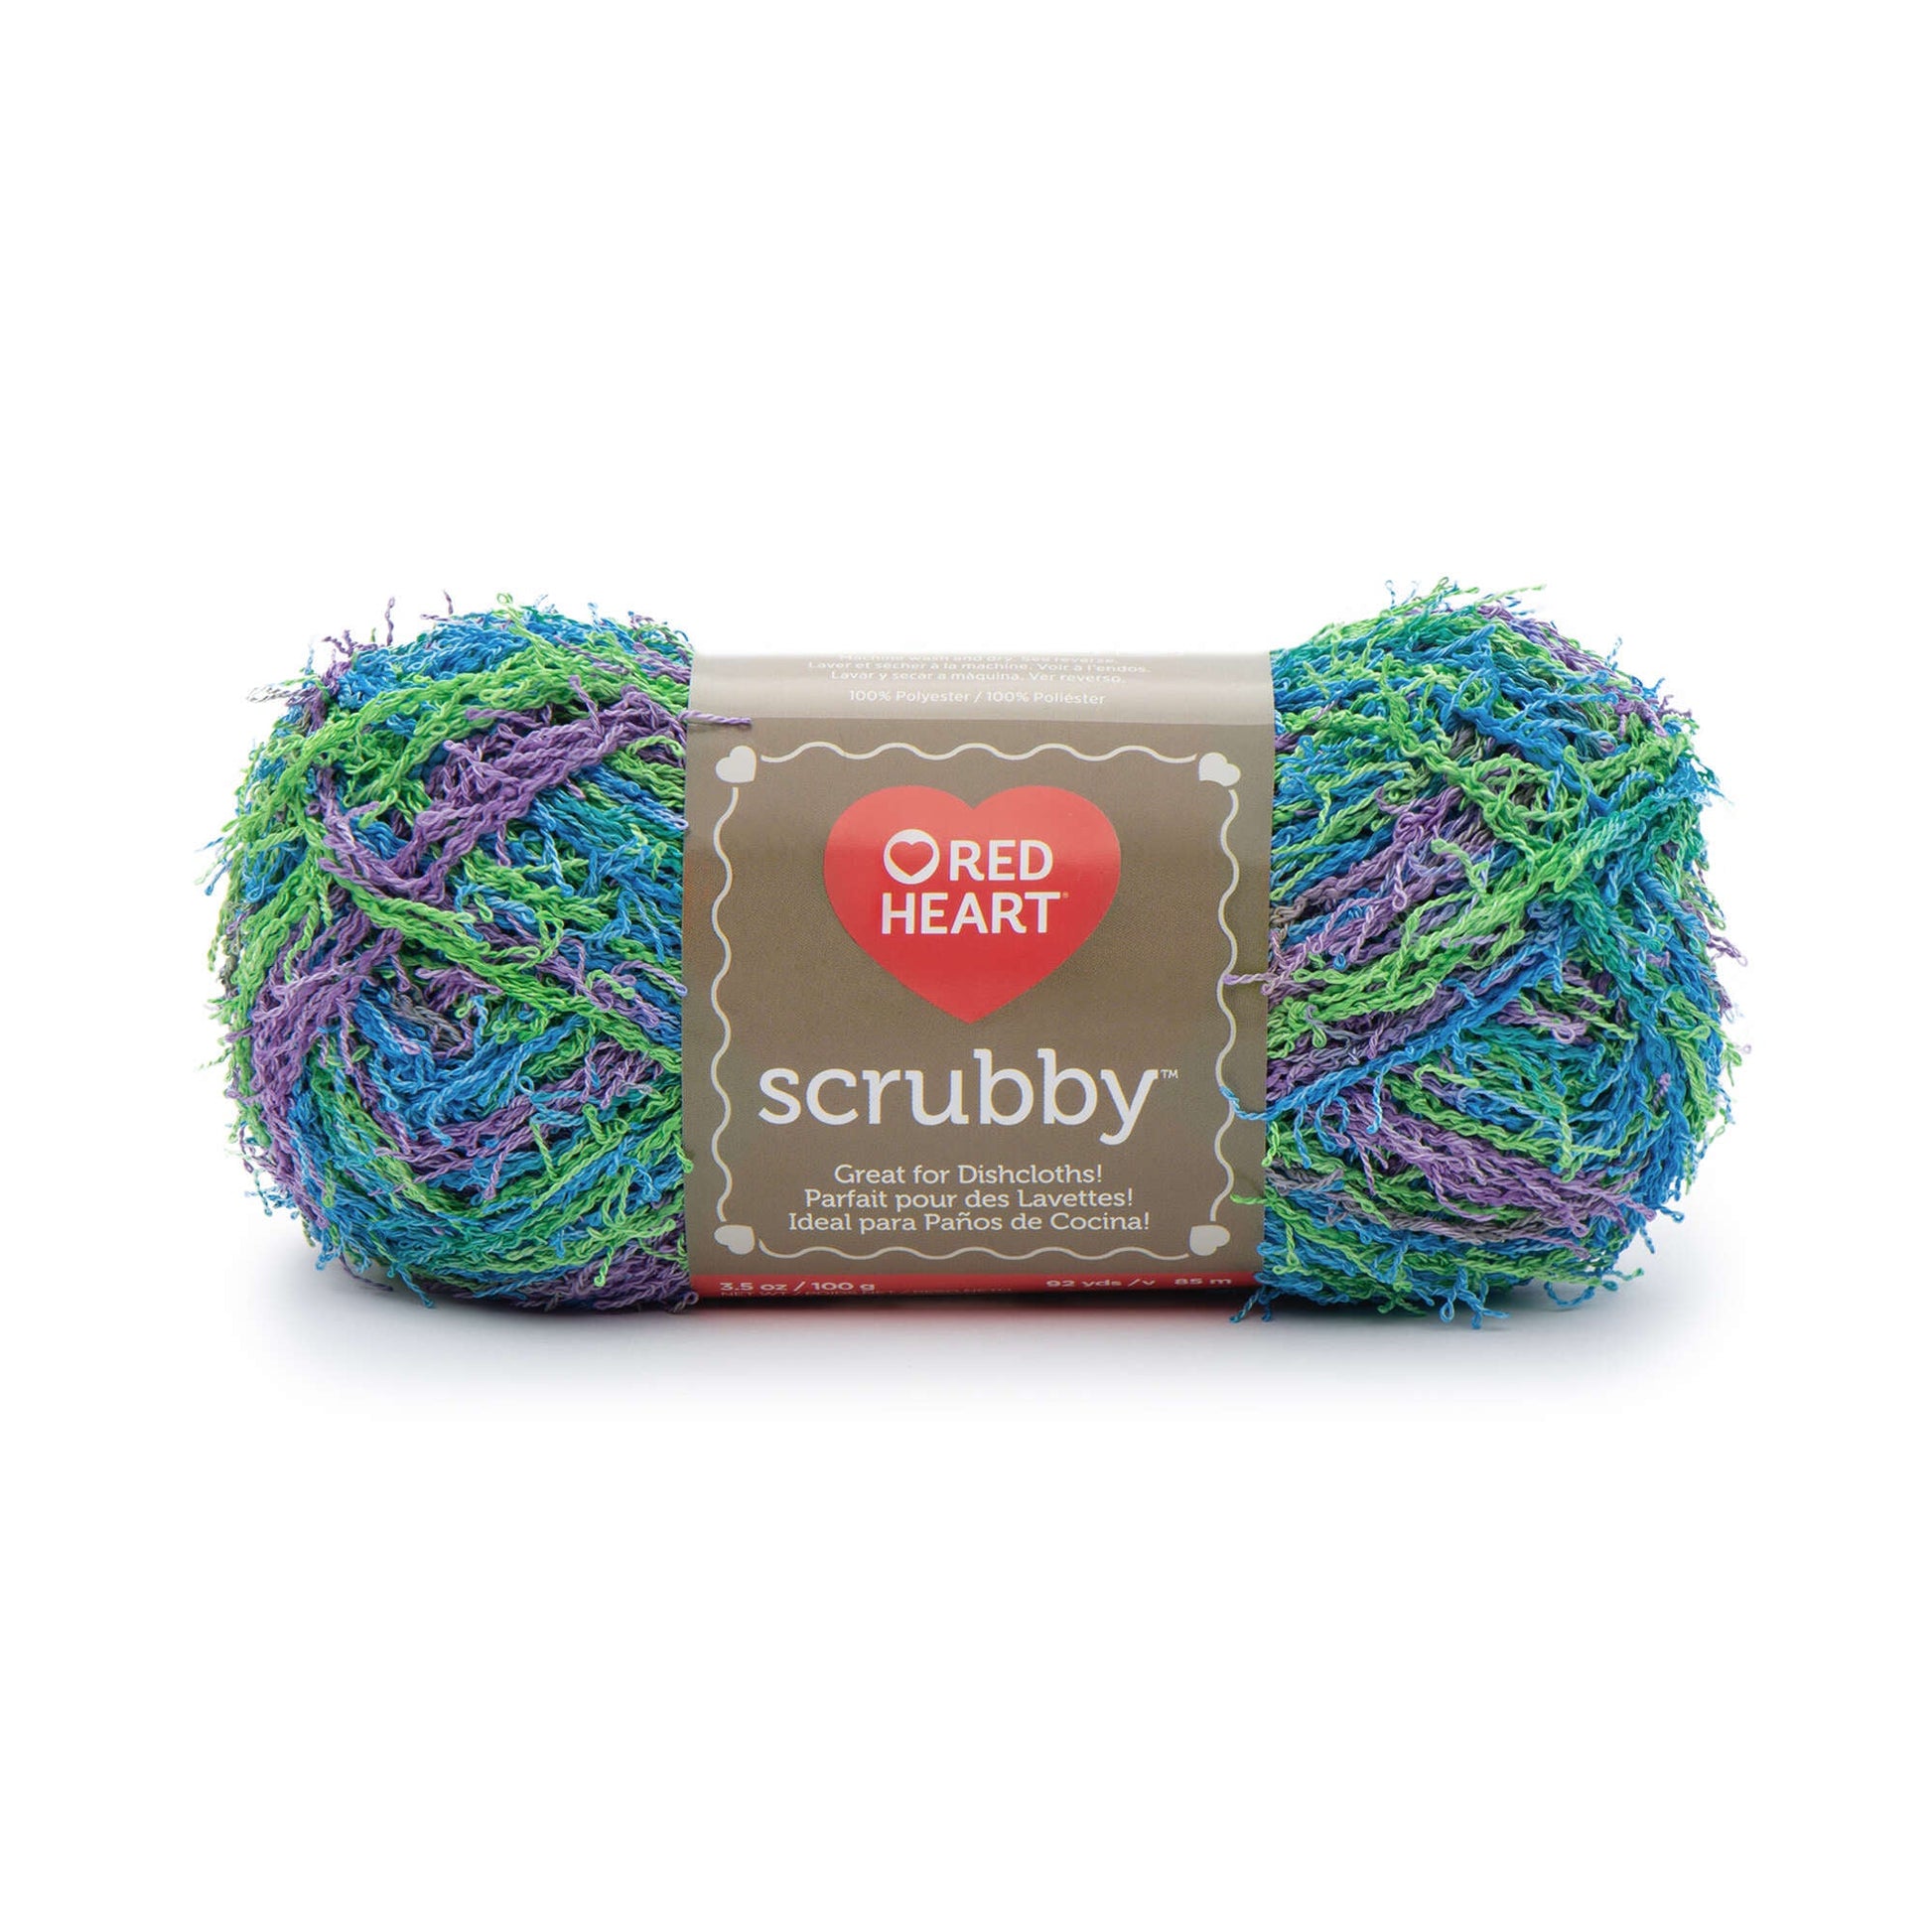 Red Heart Scrubby Yarn - Discontinued shades